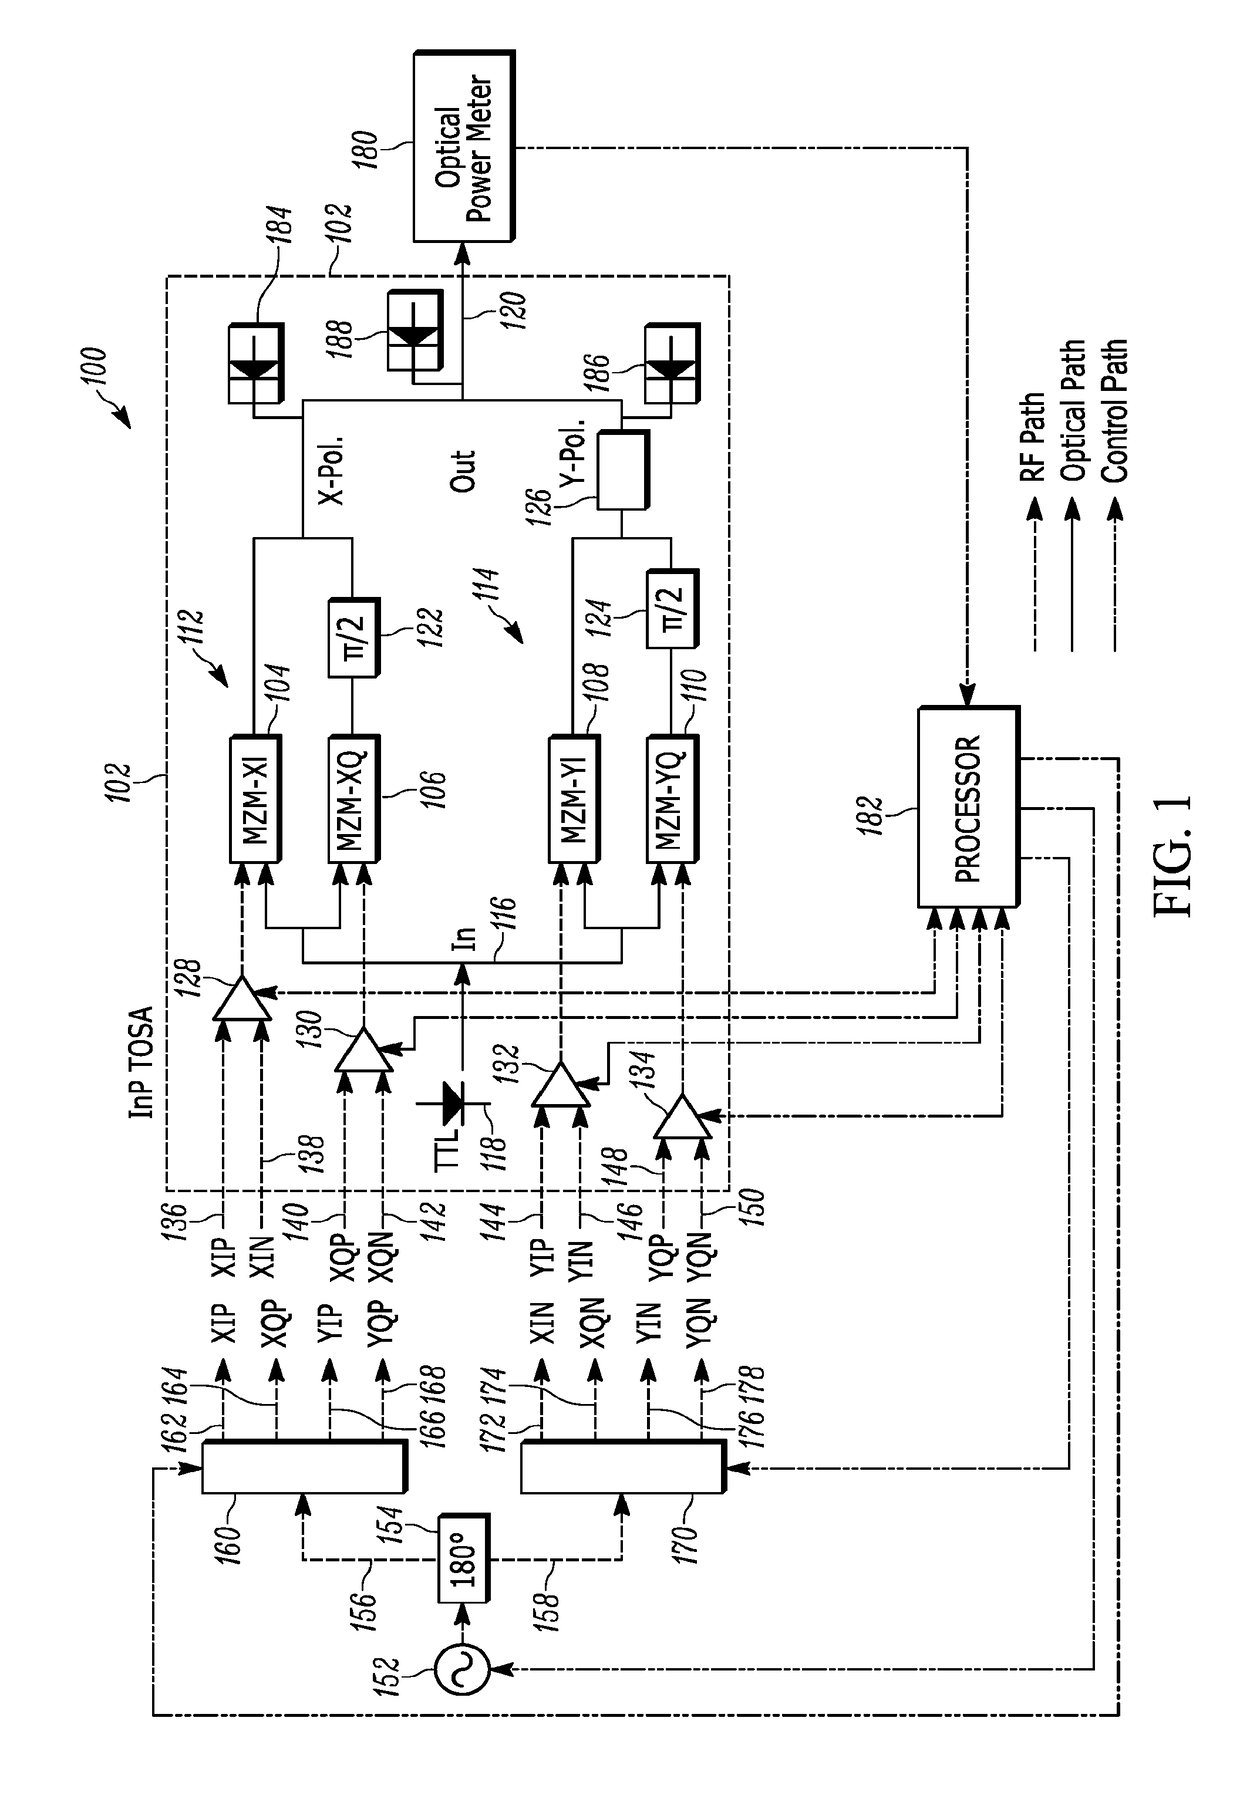 Method and Apparatus for Characterization and Compensation of Optical Impairments in InP-Based Optical Transmitter